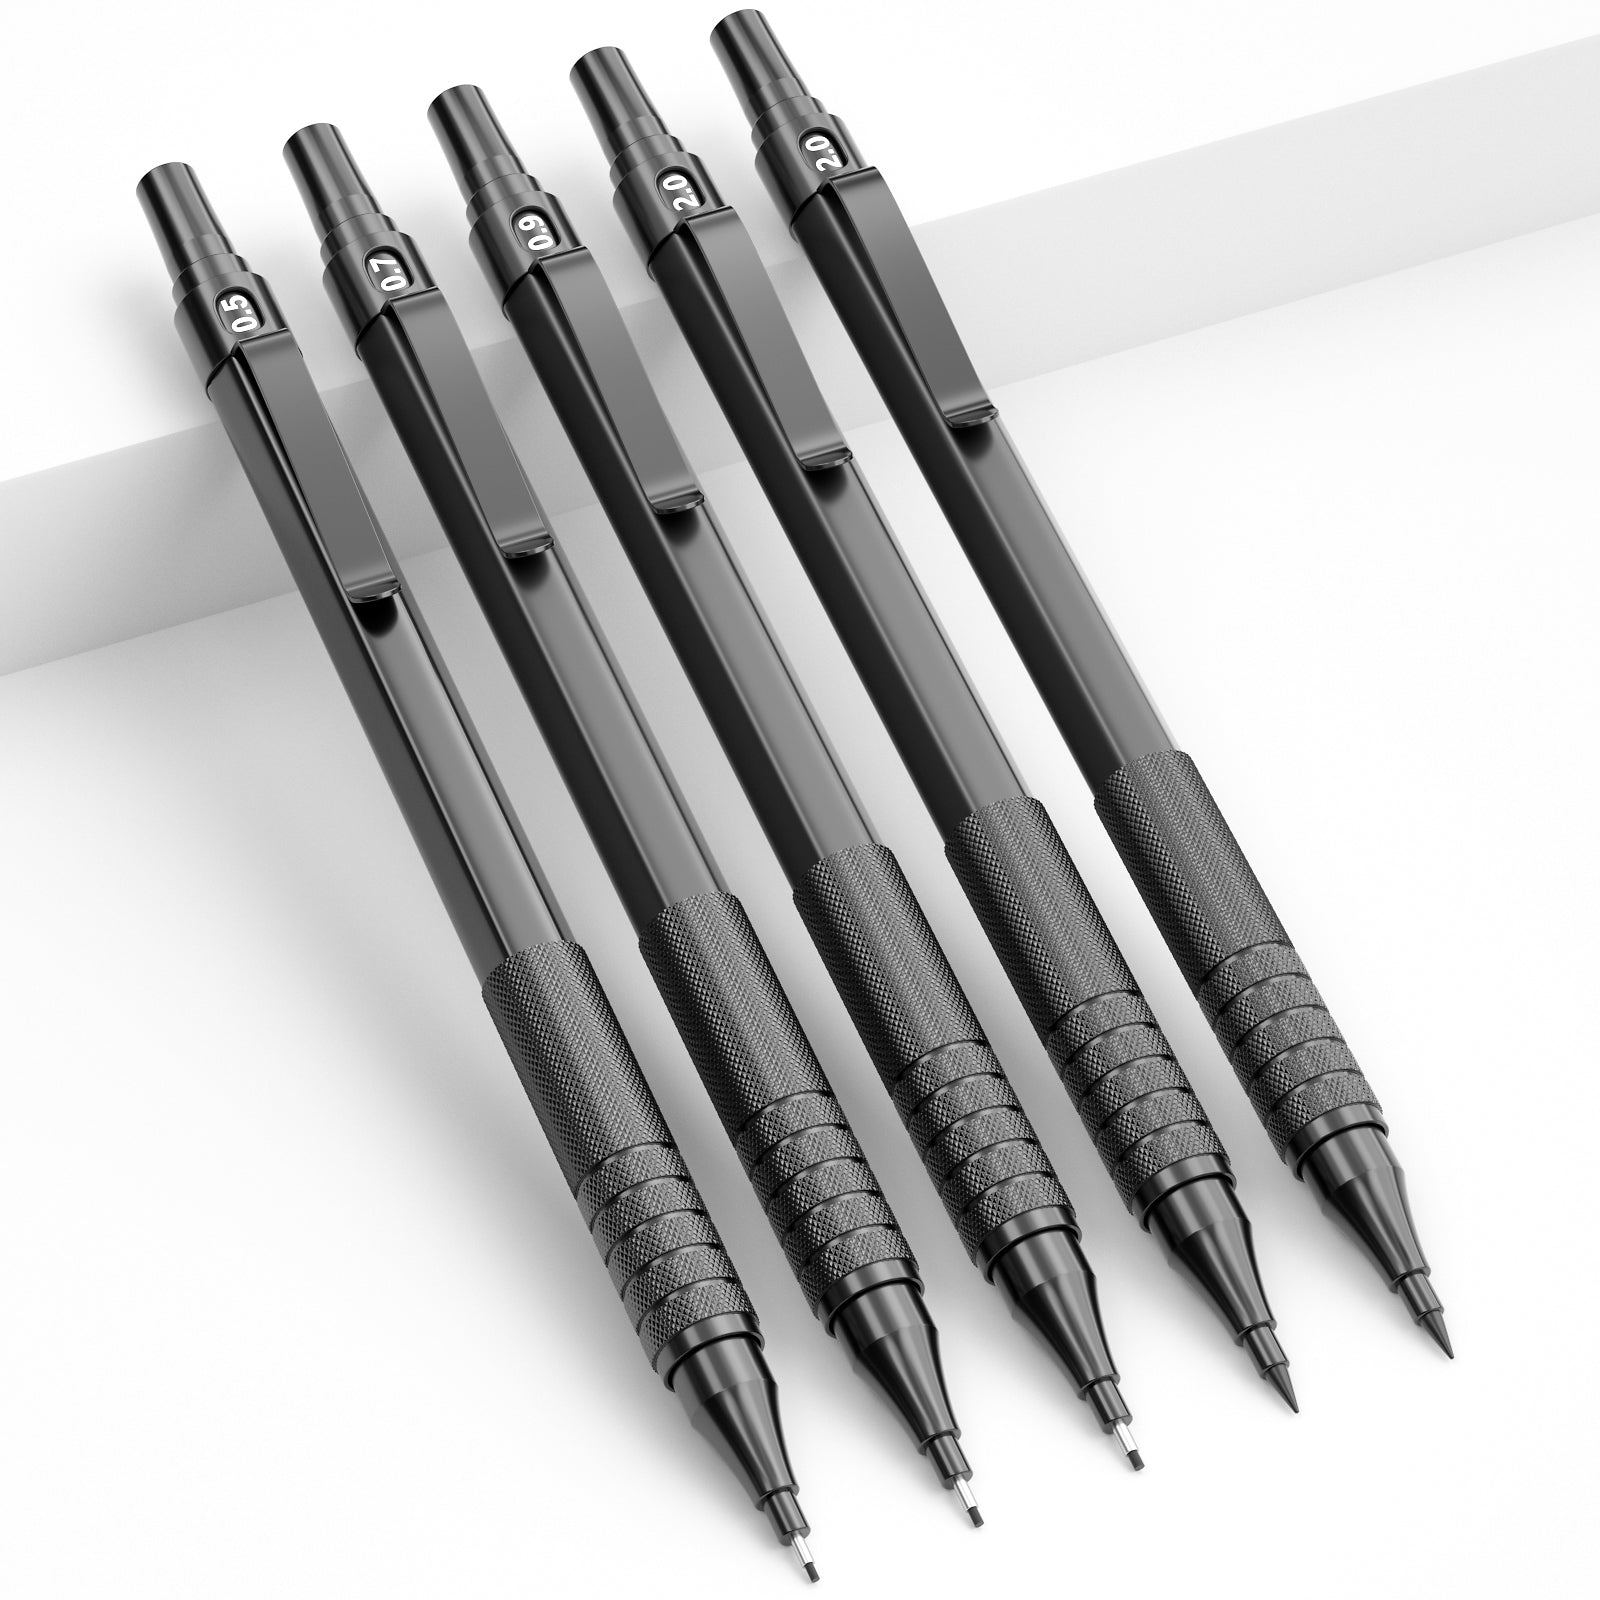 Nicpro 5 PCS Art Mechanical Pencil Set with Case, 3 PCS Metal Drafting Pencils 0.5, 0.7, 0.9 mm & 2PCS 2mm Graphite Lead Holder(4B 2B HB 2H), Lead Refills, Erasers for Drawing Writing Sketching, Black